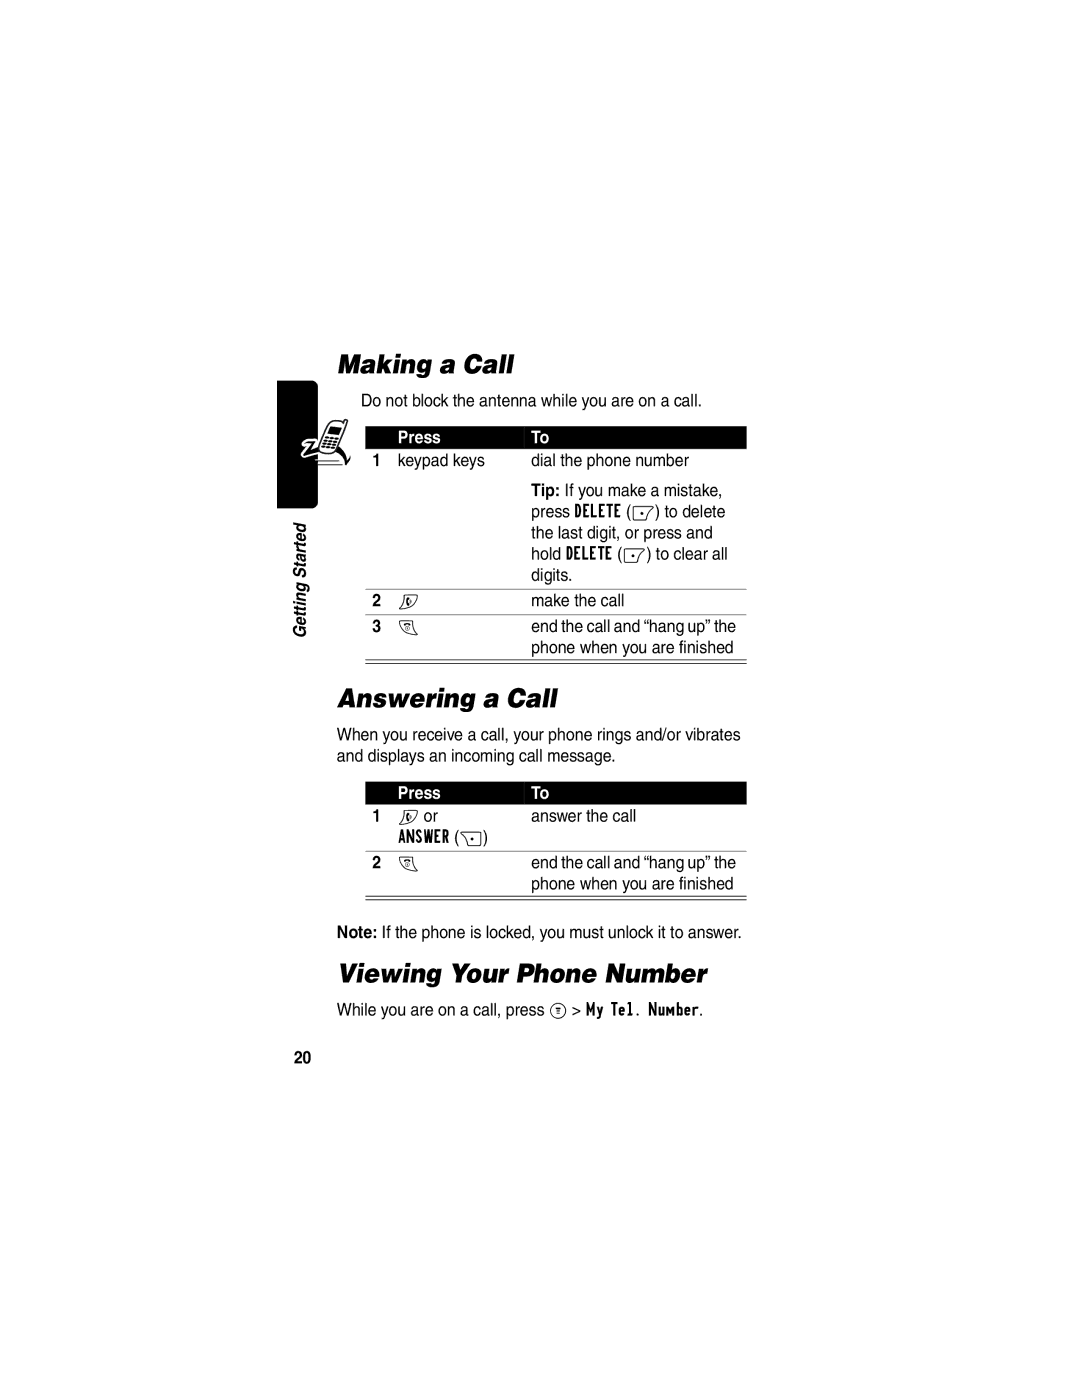 Motorola C353 manual Making a Call, Answering a Call, Viewing Your Phone Number, Press 